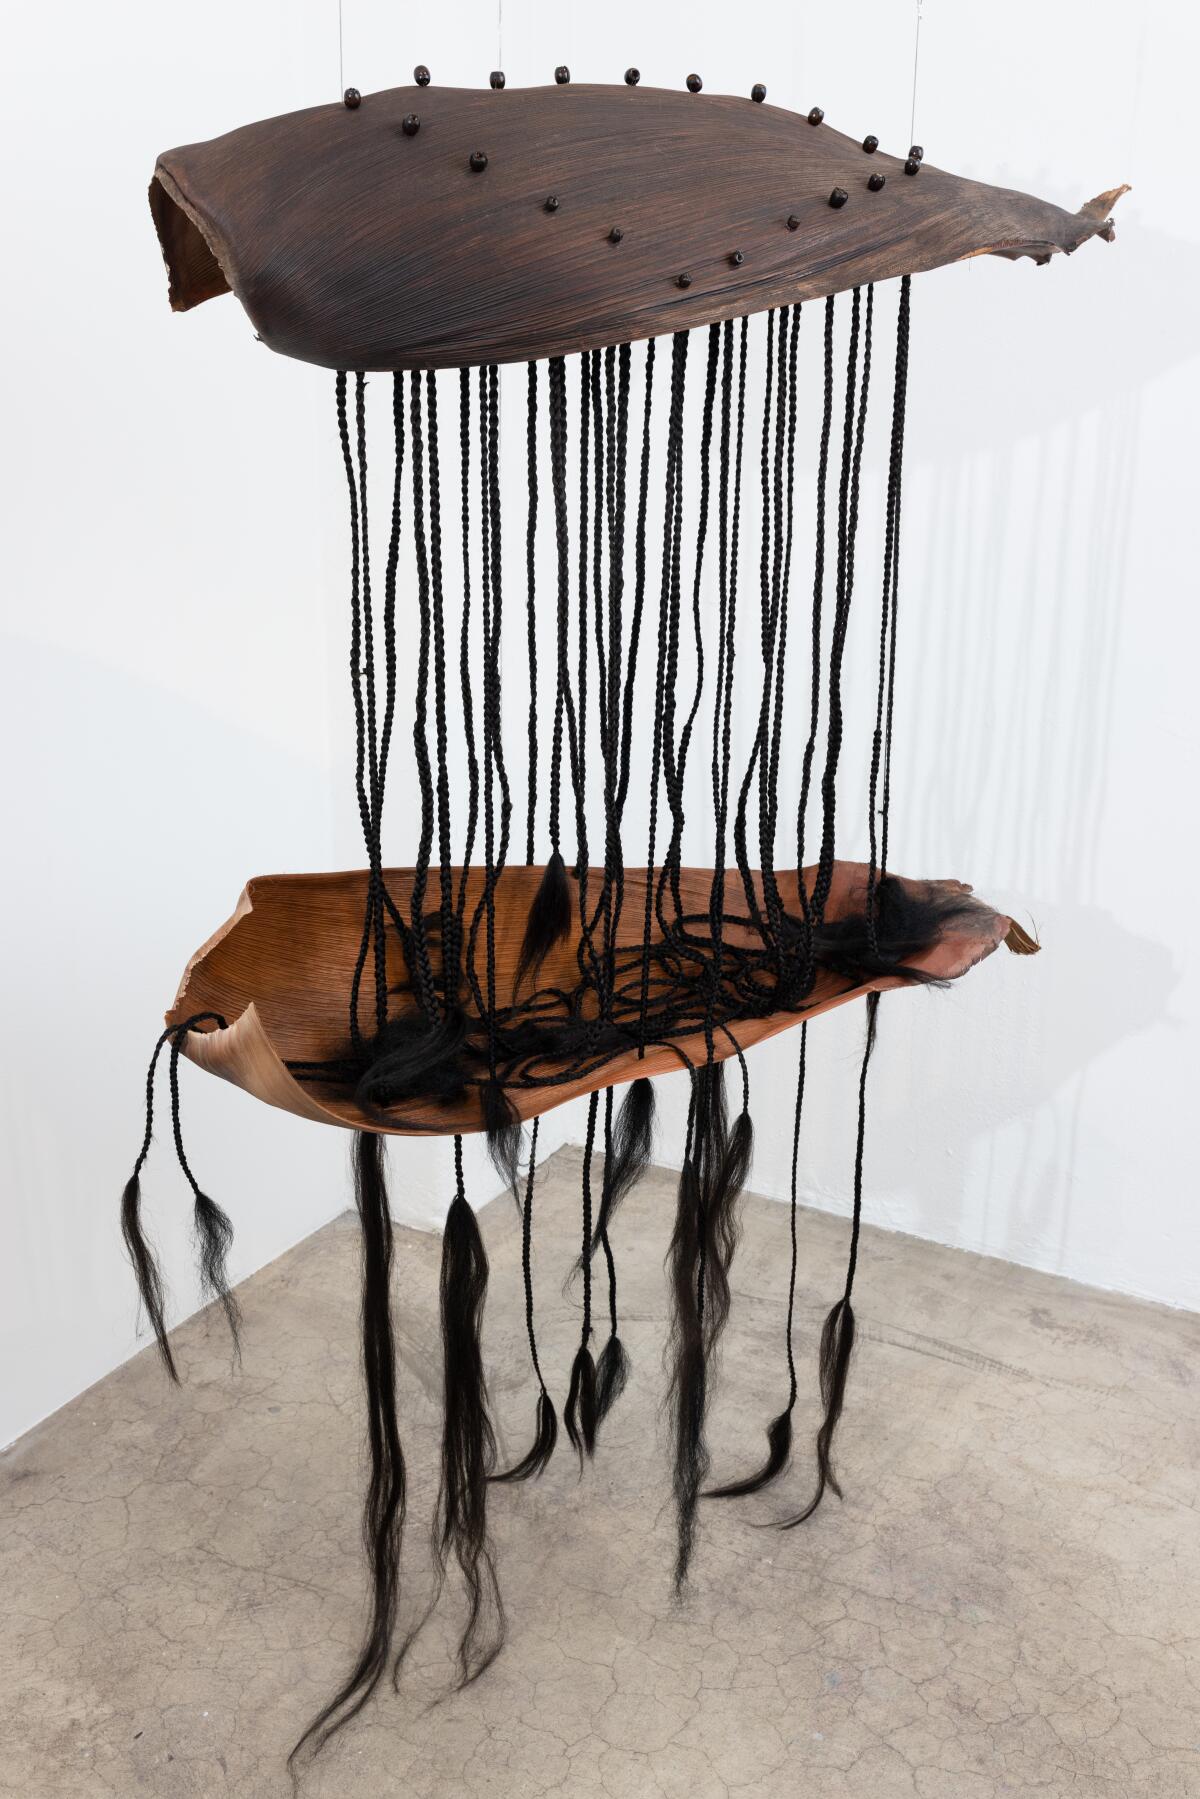 A hanging sculpture made of palm leaves, synthetic hair and wood beads.